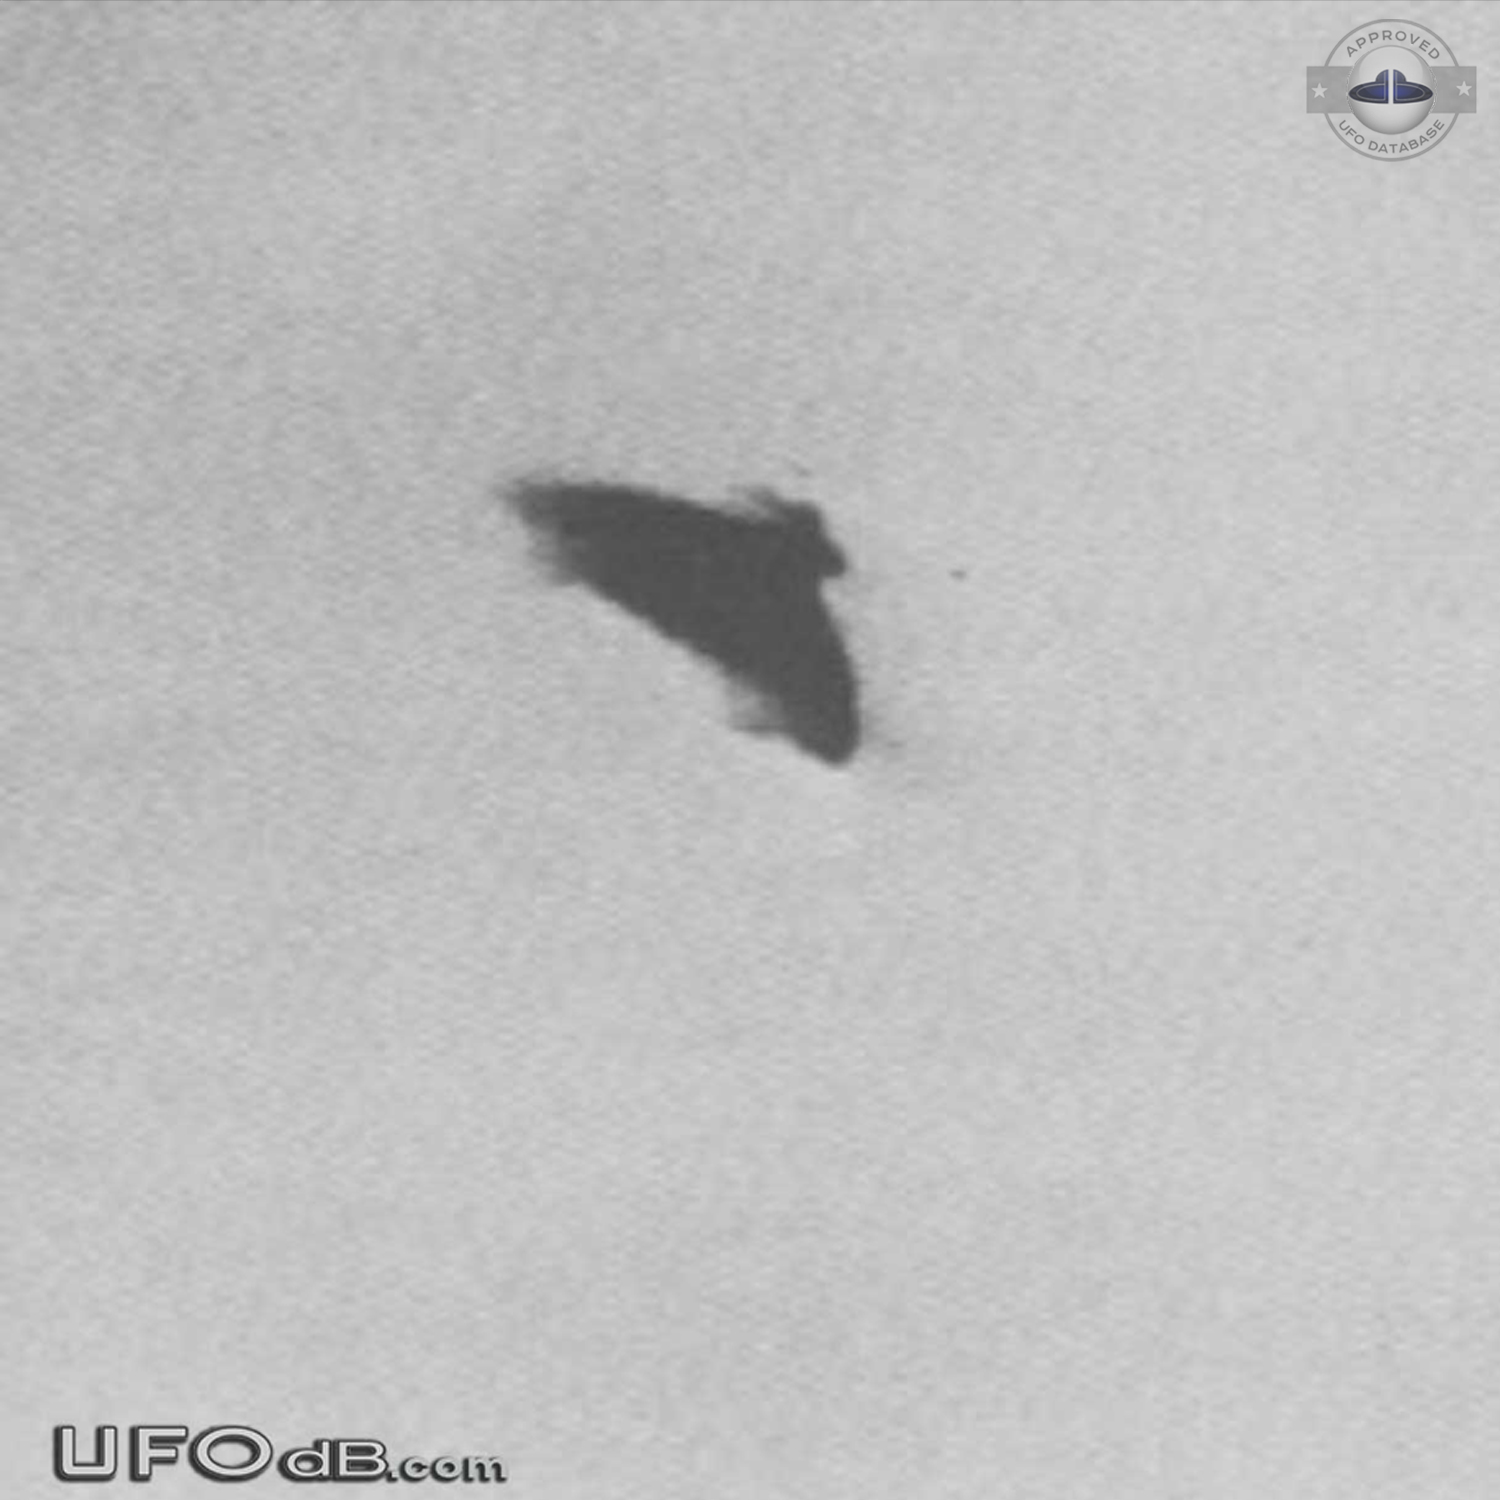 Bell Shaped UFO caught on picture in May 1975 in Chiba, Japan - Asia UFO Picture #447-2